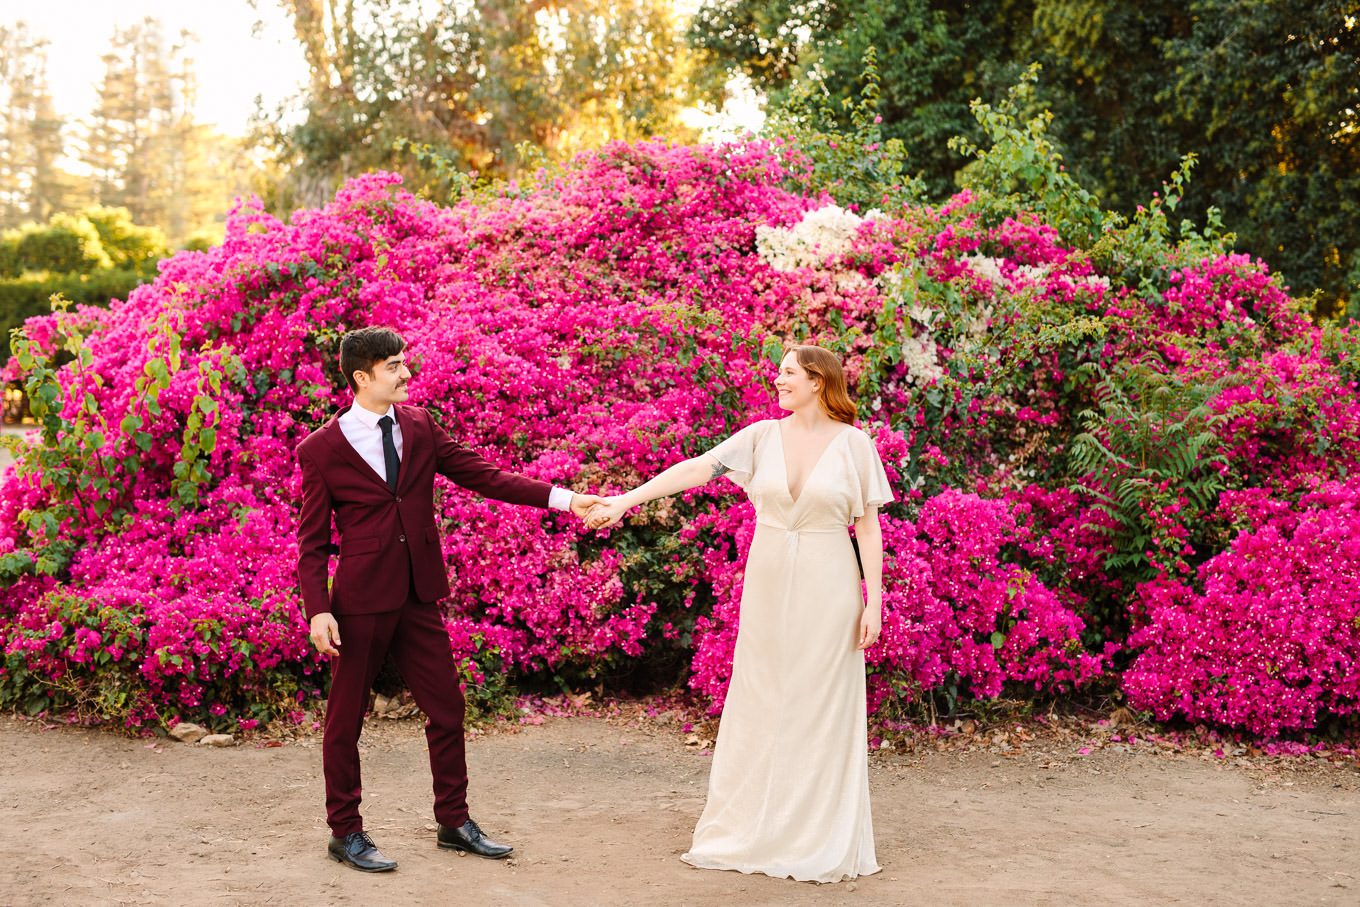 Bride and groom in front of lush magenta bougainvillea | Los Angeles Arboretum Elopement | Colorful and elevated wedding photography for fun-loving couples in Southern California | #LosAngelesElopement #elopement #LAarboretum #LAskyline #elopementphotos   Source: Mary Costa Photography | Los Angeles